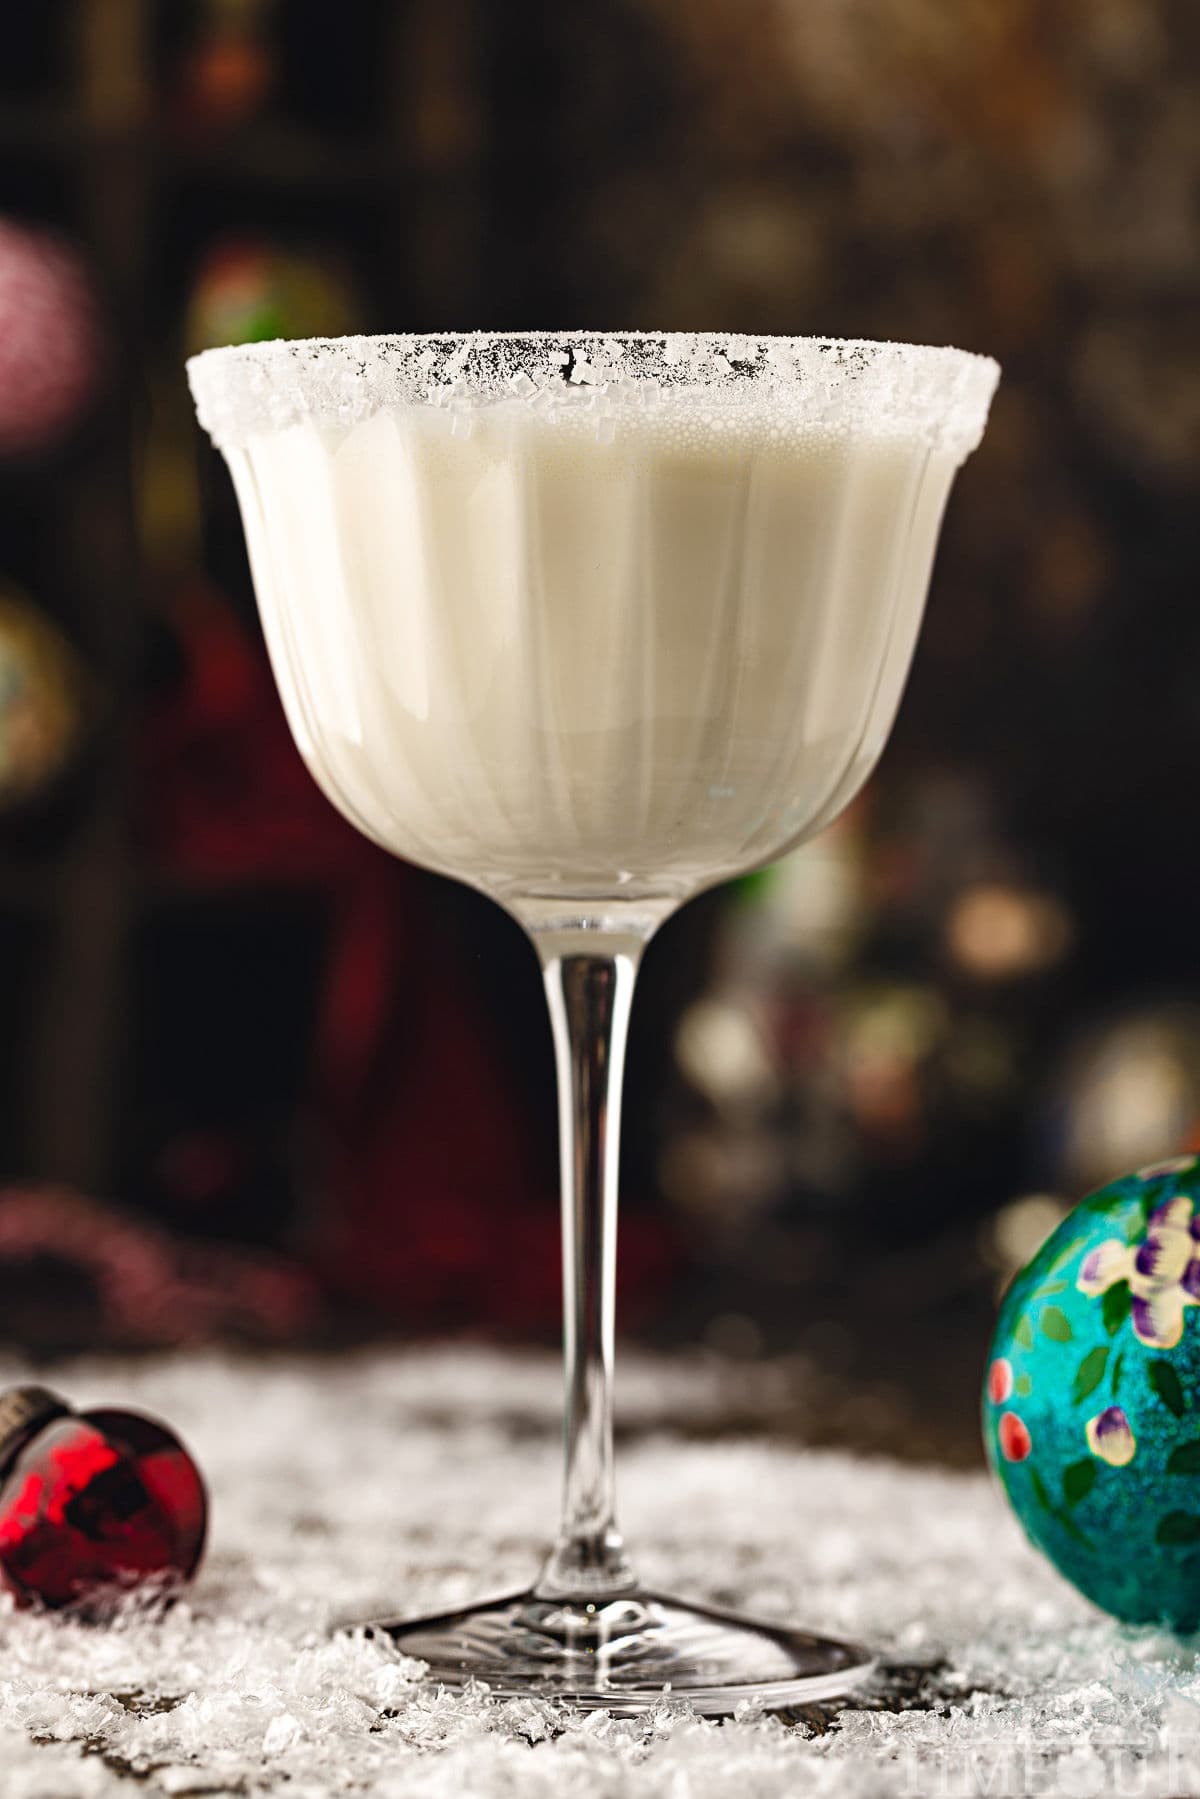 white chocolate martini cocktail in tall glass dusted with powdered sugar for a snowy look. the cocktails is sitting on a snowy surface with glass ornaments scattered about.